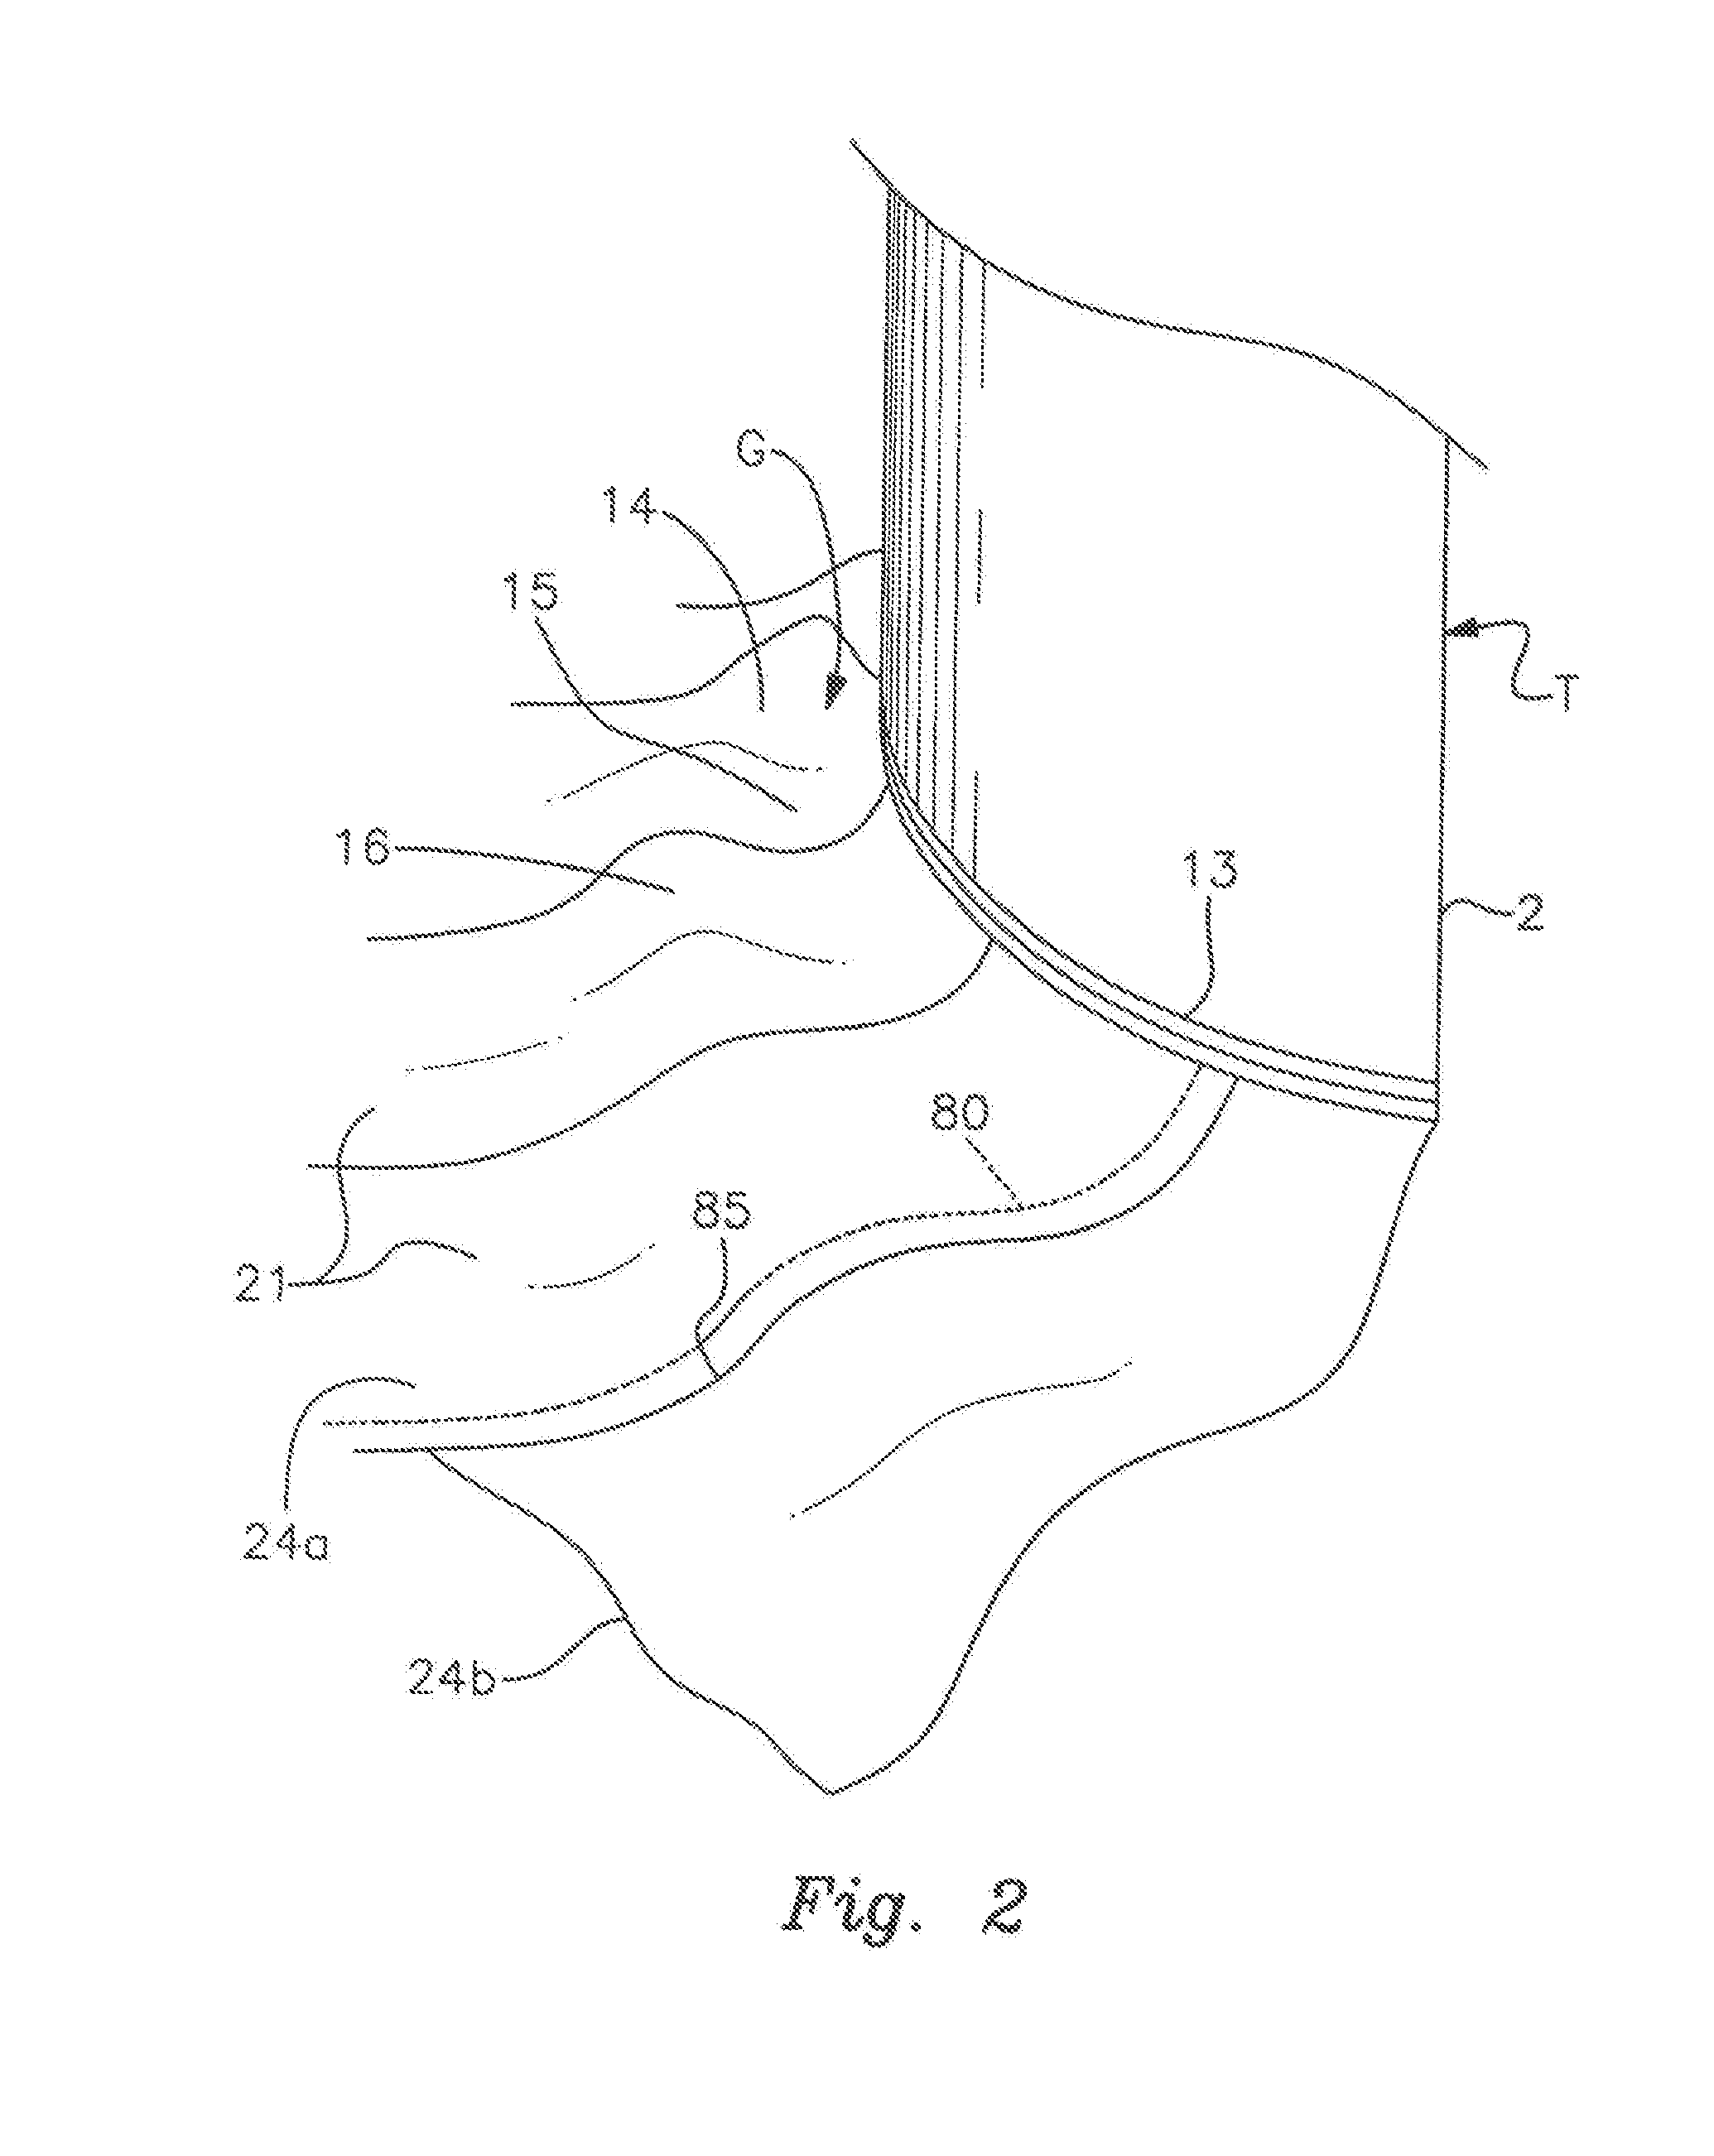 Secondary Containment Panels And Process For Making And Installing Same